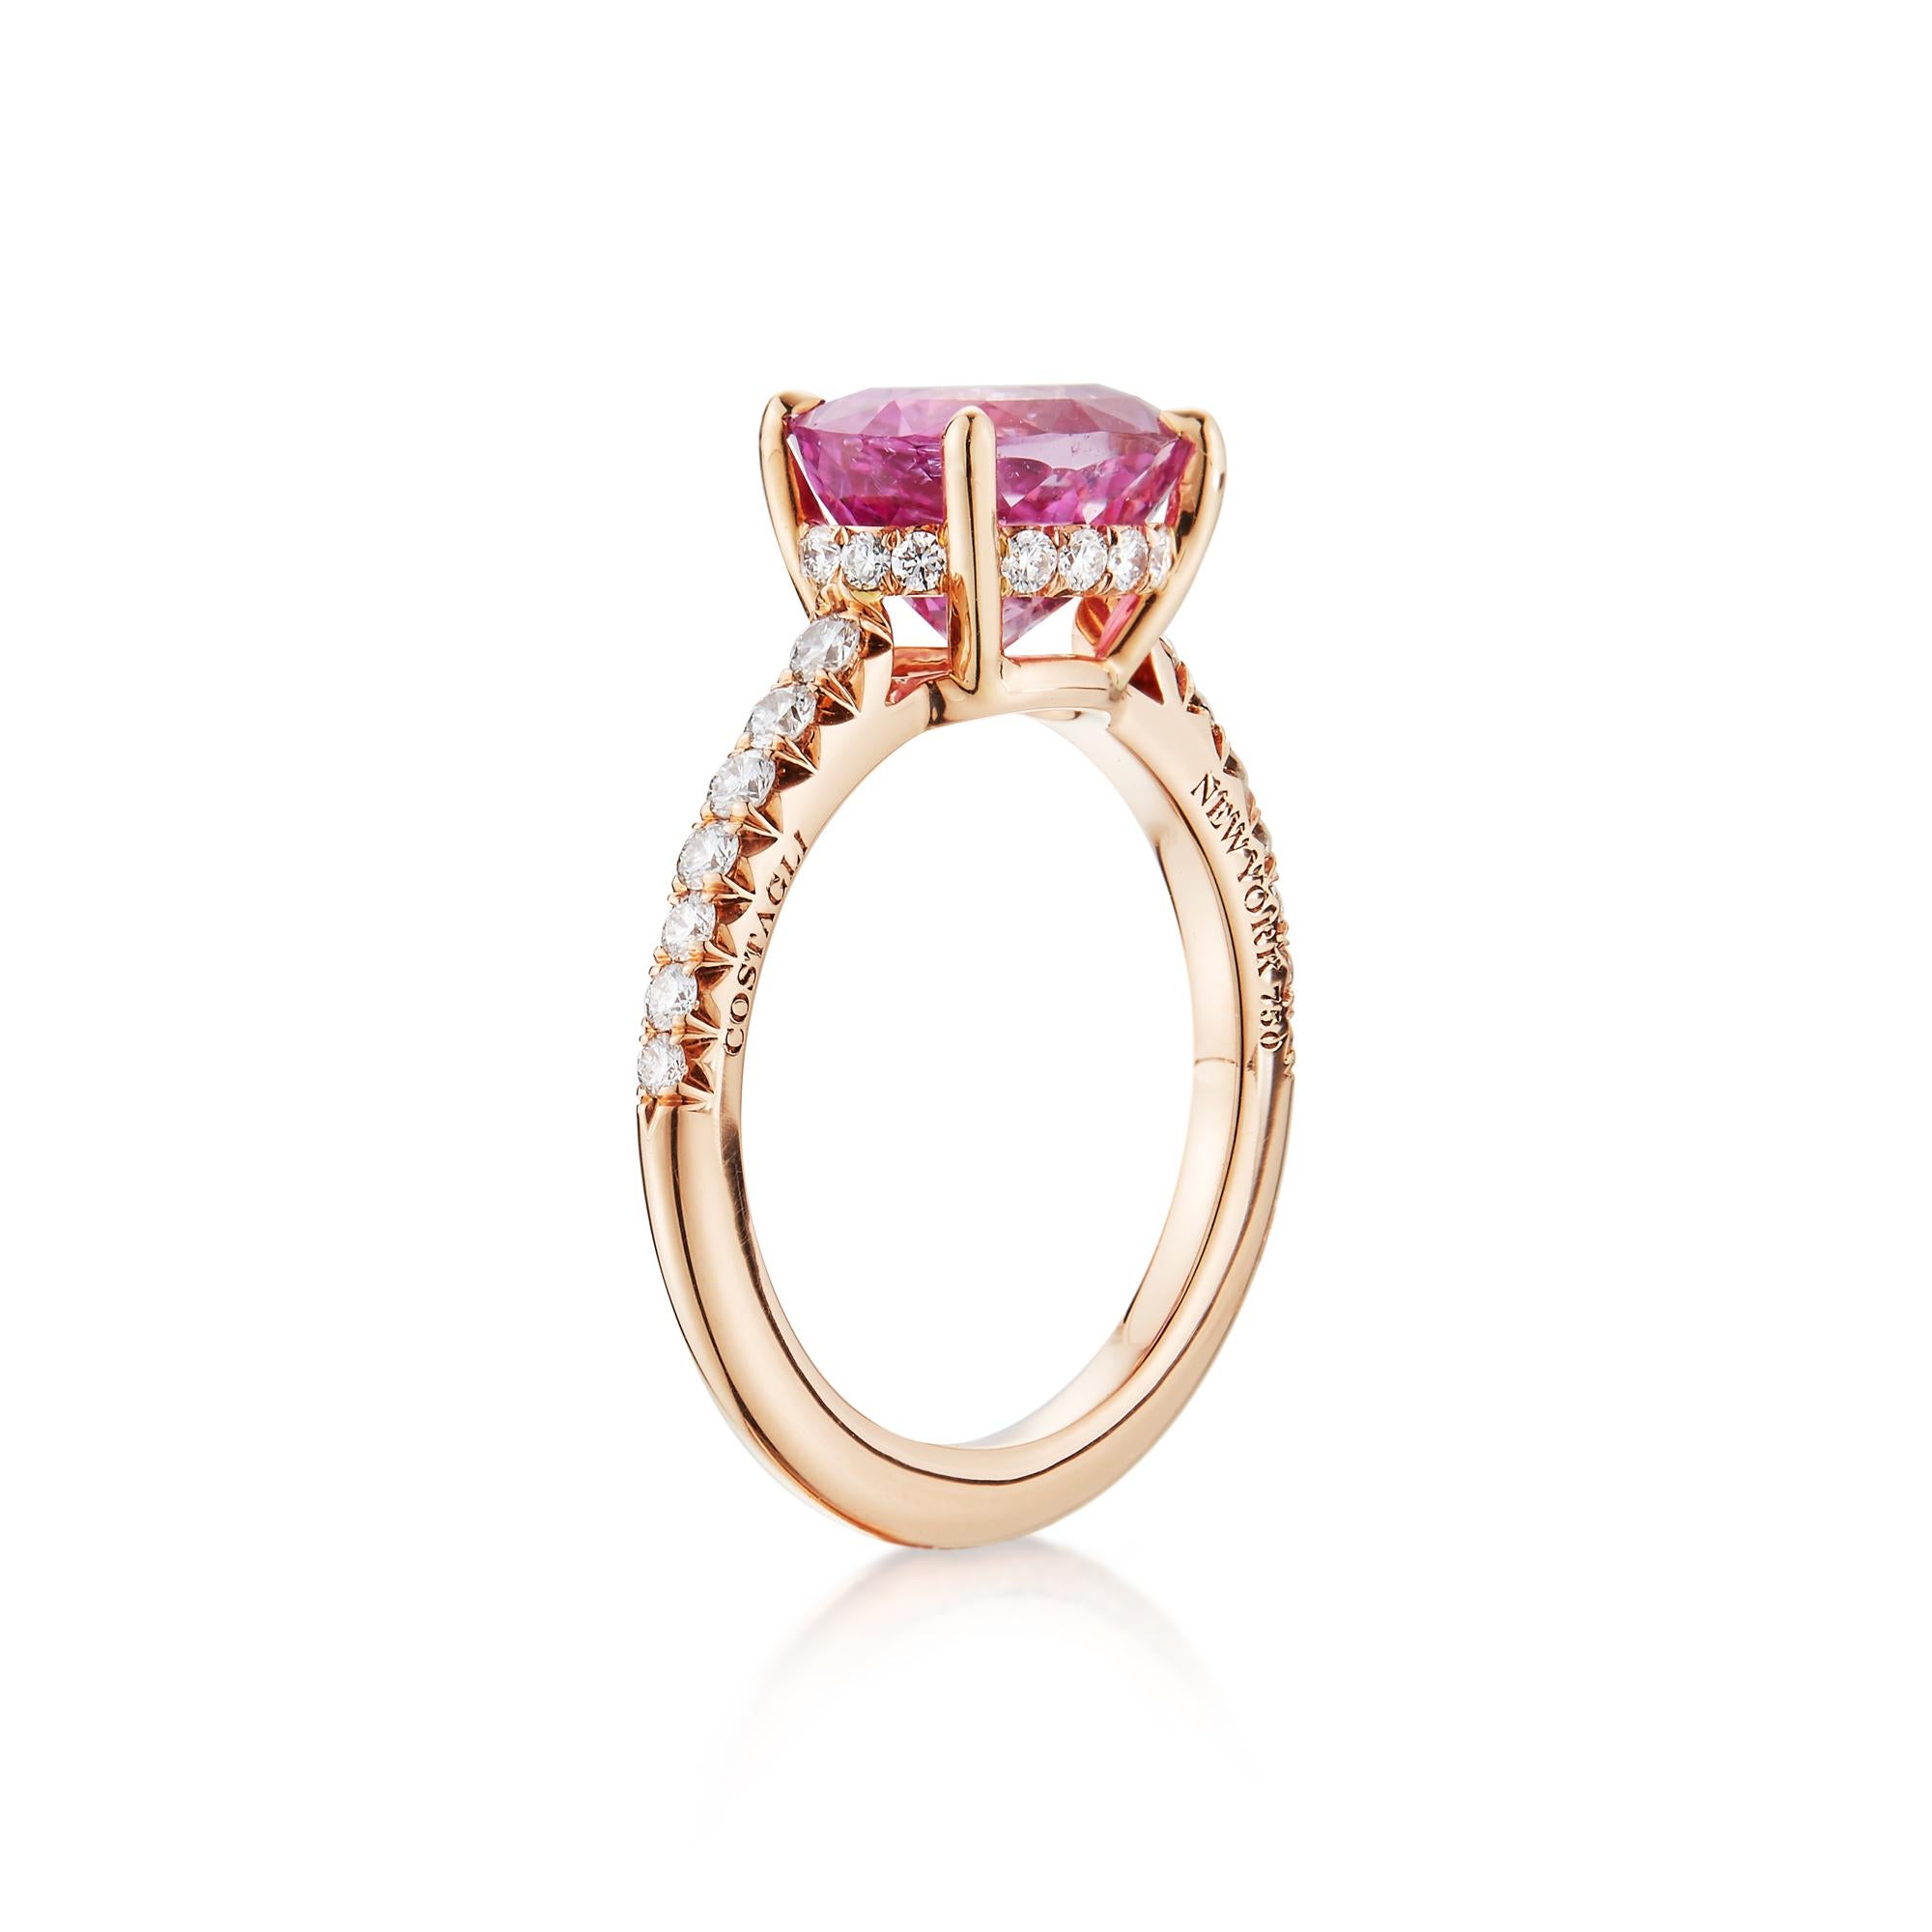 18 karat rose gold ring set with an oval shape pink sapphire with diamond detail. 

Each Paolo Costagli contemporary engagement ring is a one of a kind, handcrafted testament to your love story. 

The beauty is in the details - from the combination